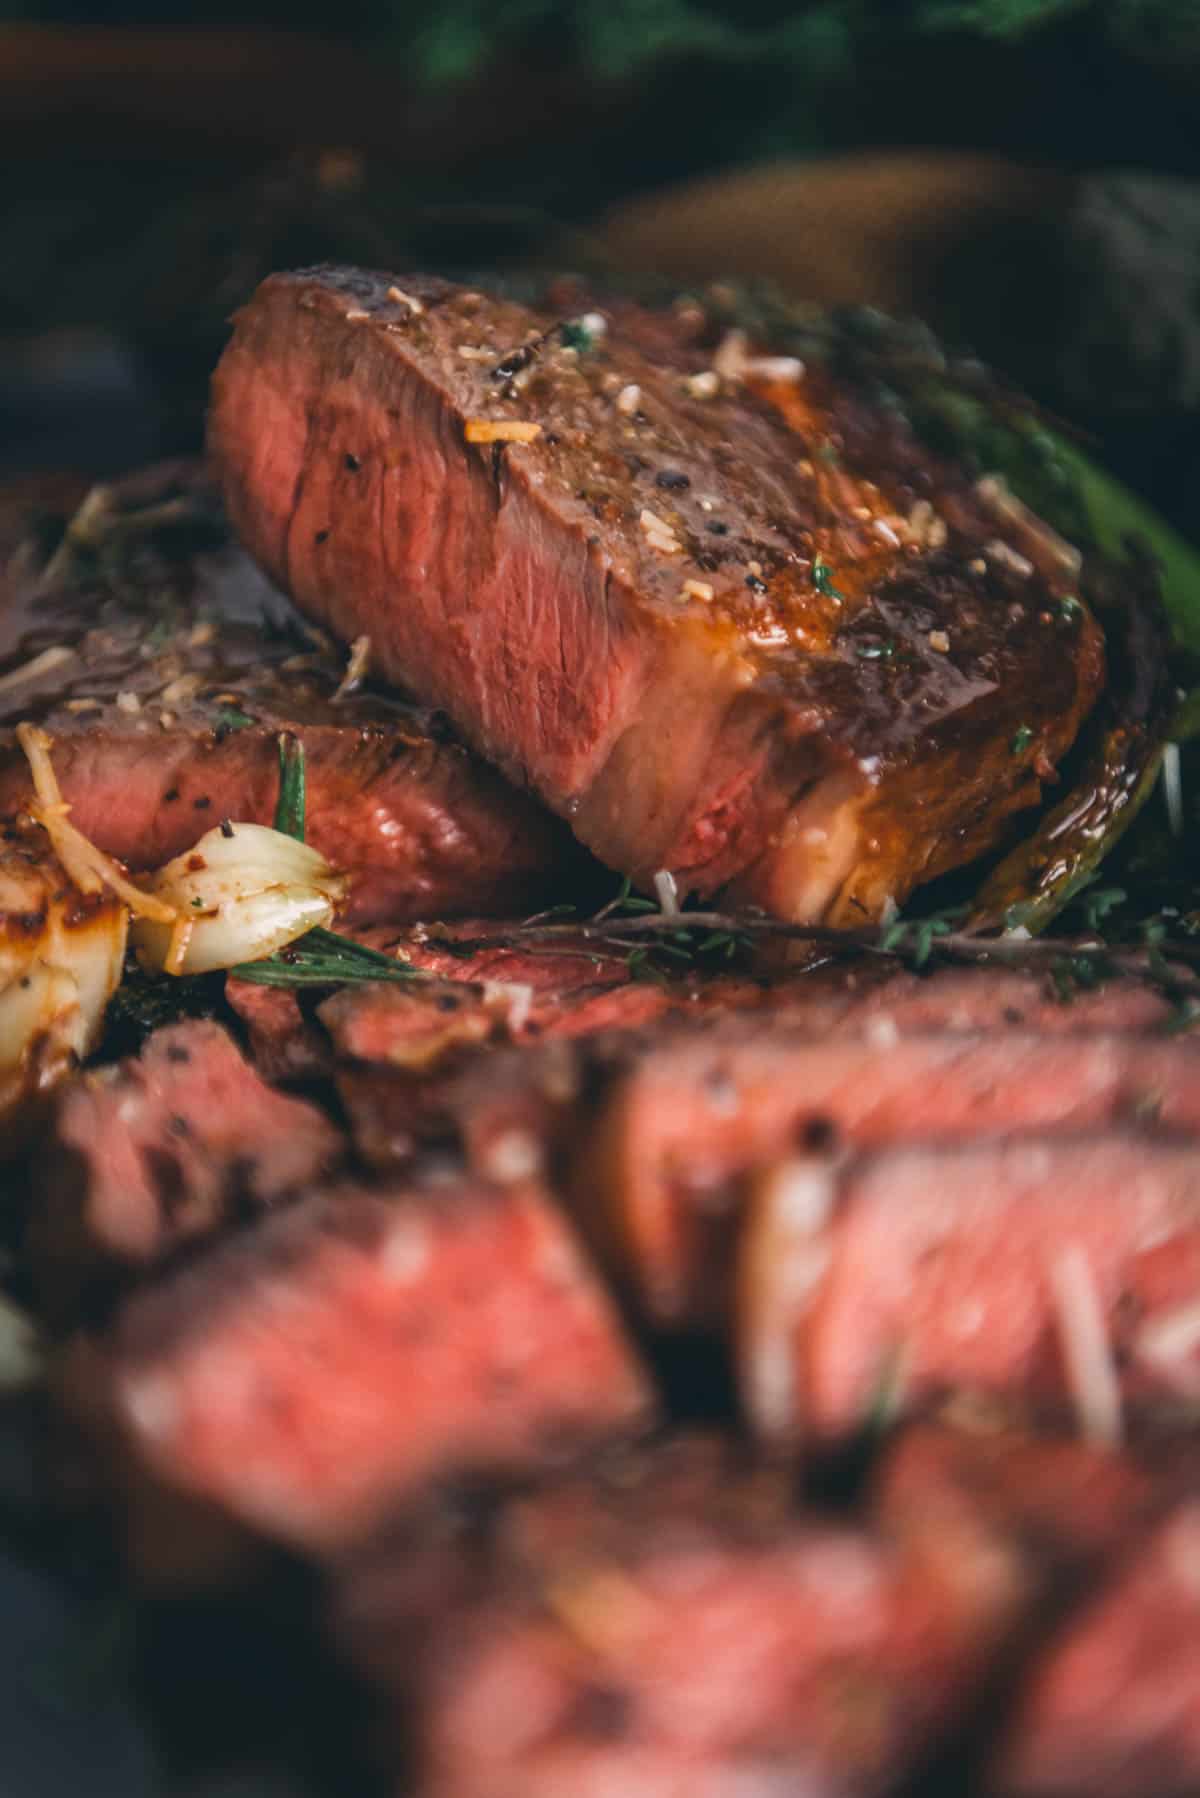 Sliced medium-rare steak seasoned with herbs and spices, focused in the foreground with a blurred background.